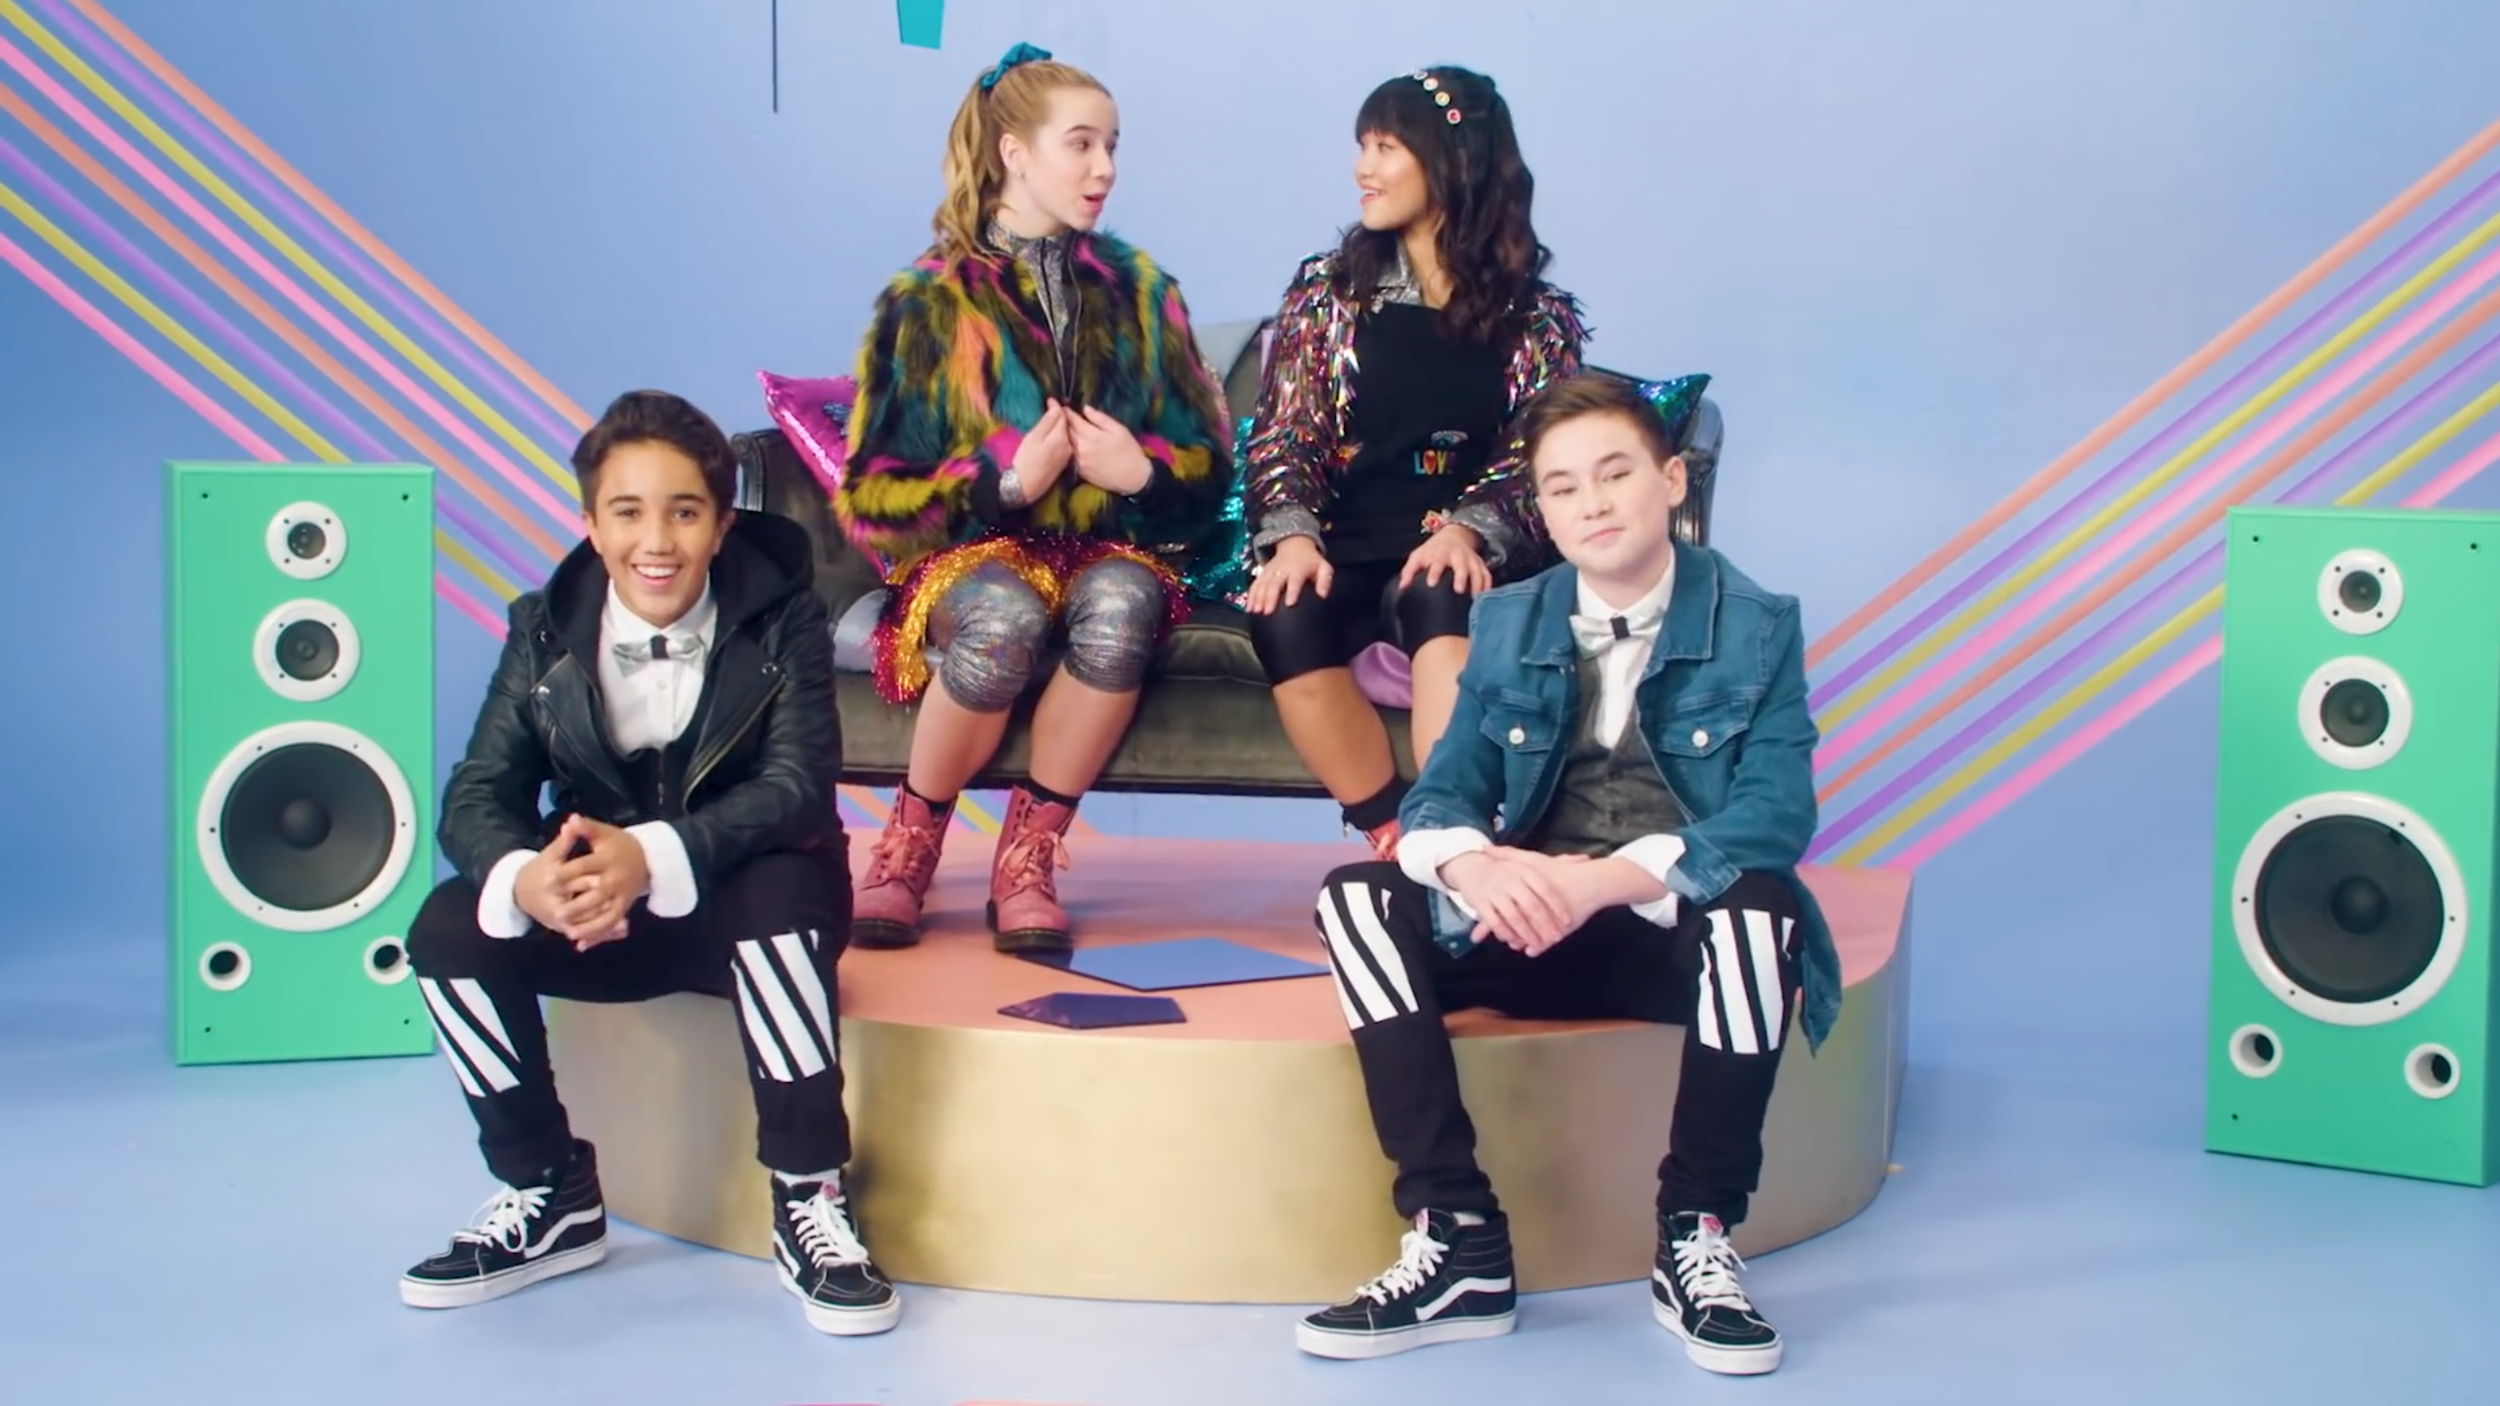 KIDZ BOP 2020 New Year's Eve Special